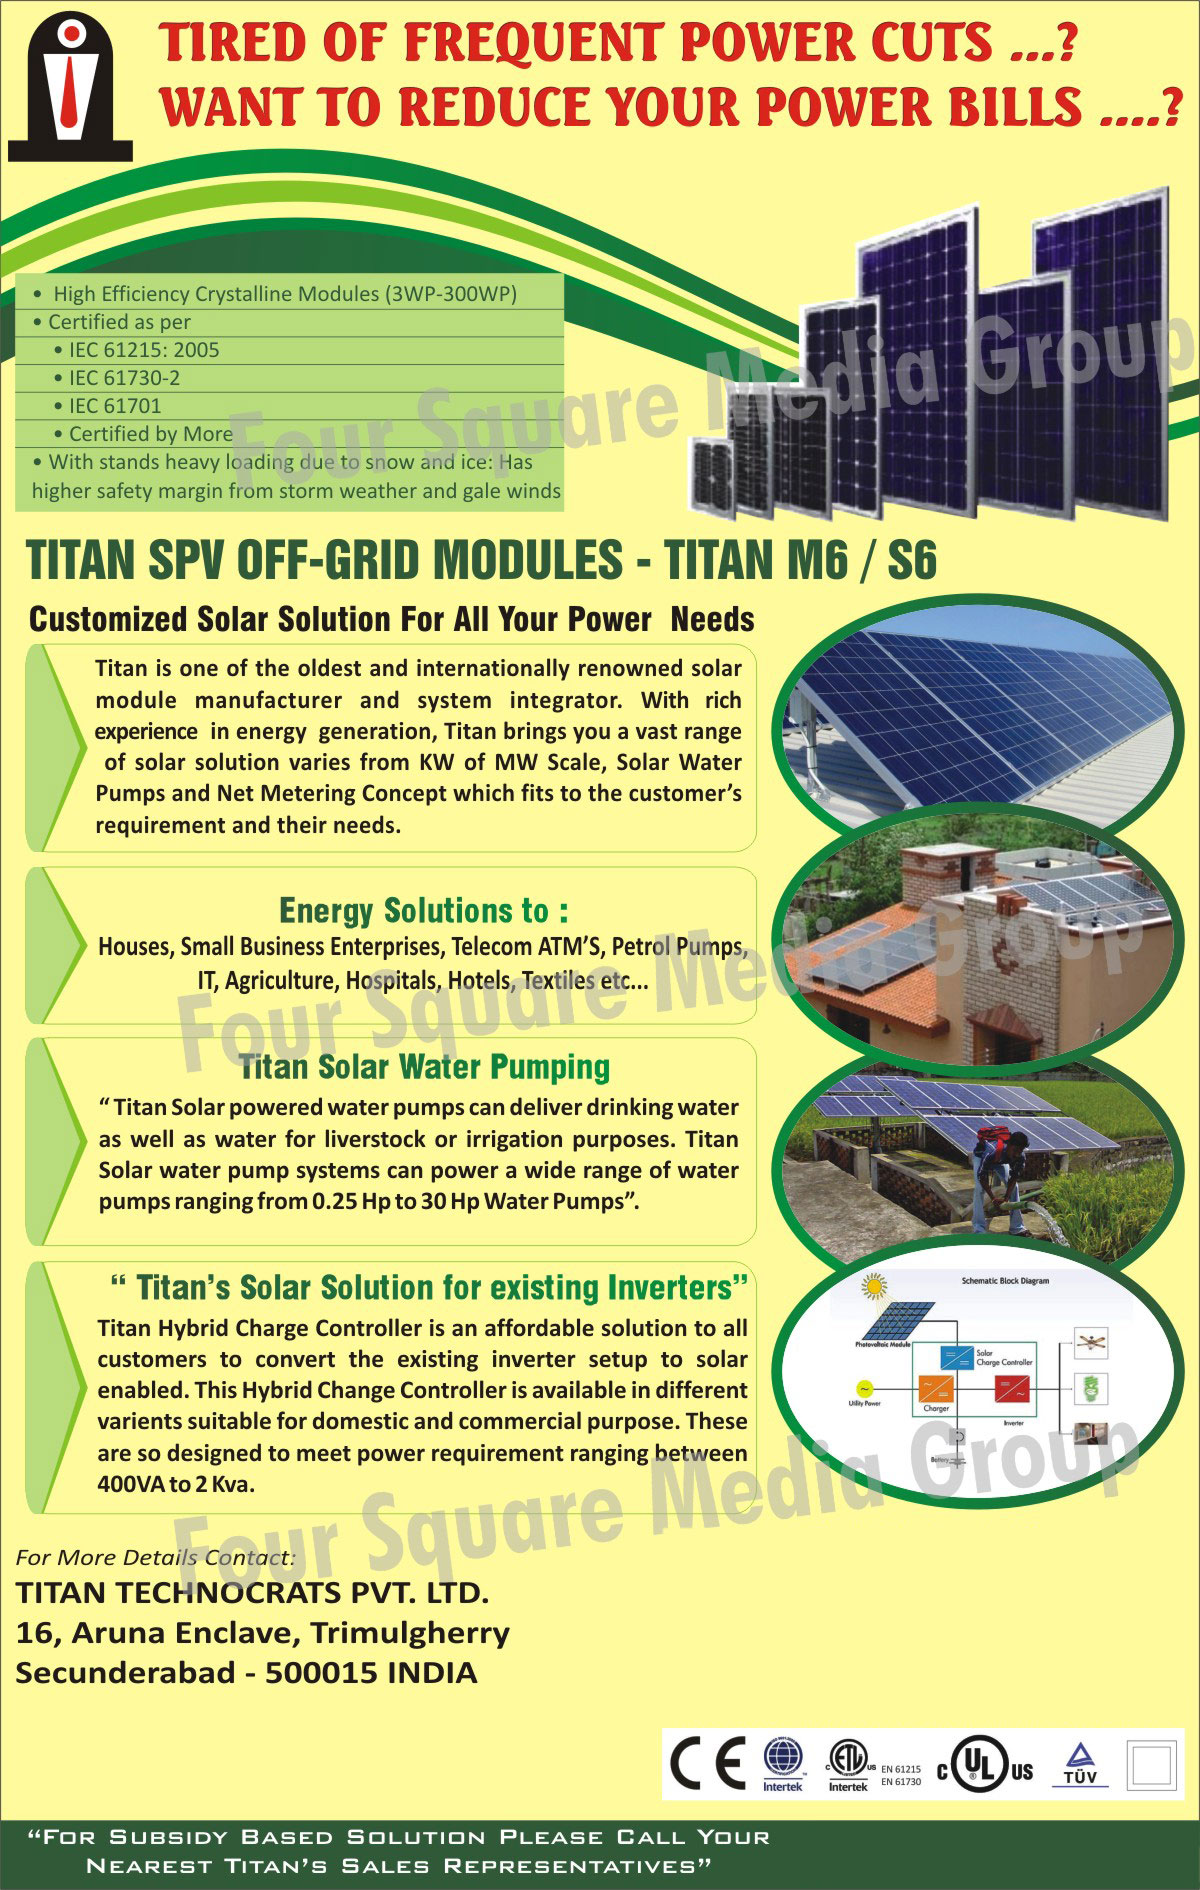 Crystalline Modules, SPV Off Grid Modules, Solar Water Pumps, Hybrid Charge Controller, convert Existing Inverter into Solar Inverter,Solar Products, Panels, Inverters, Water Pump, Street Lights, Lantern